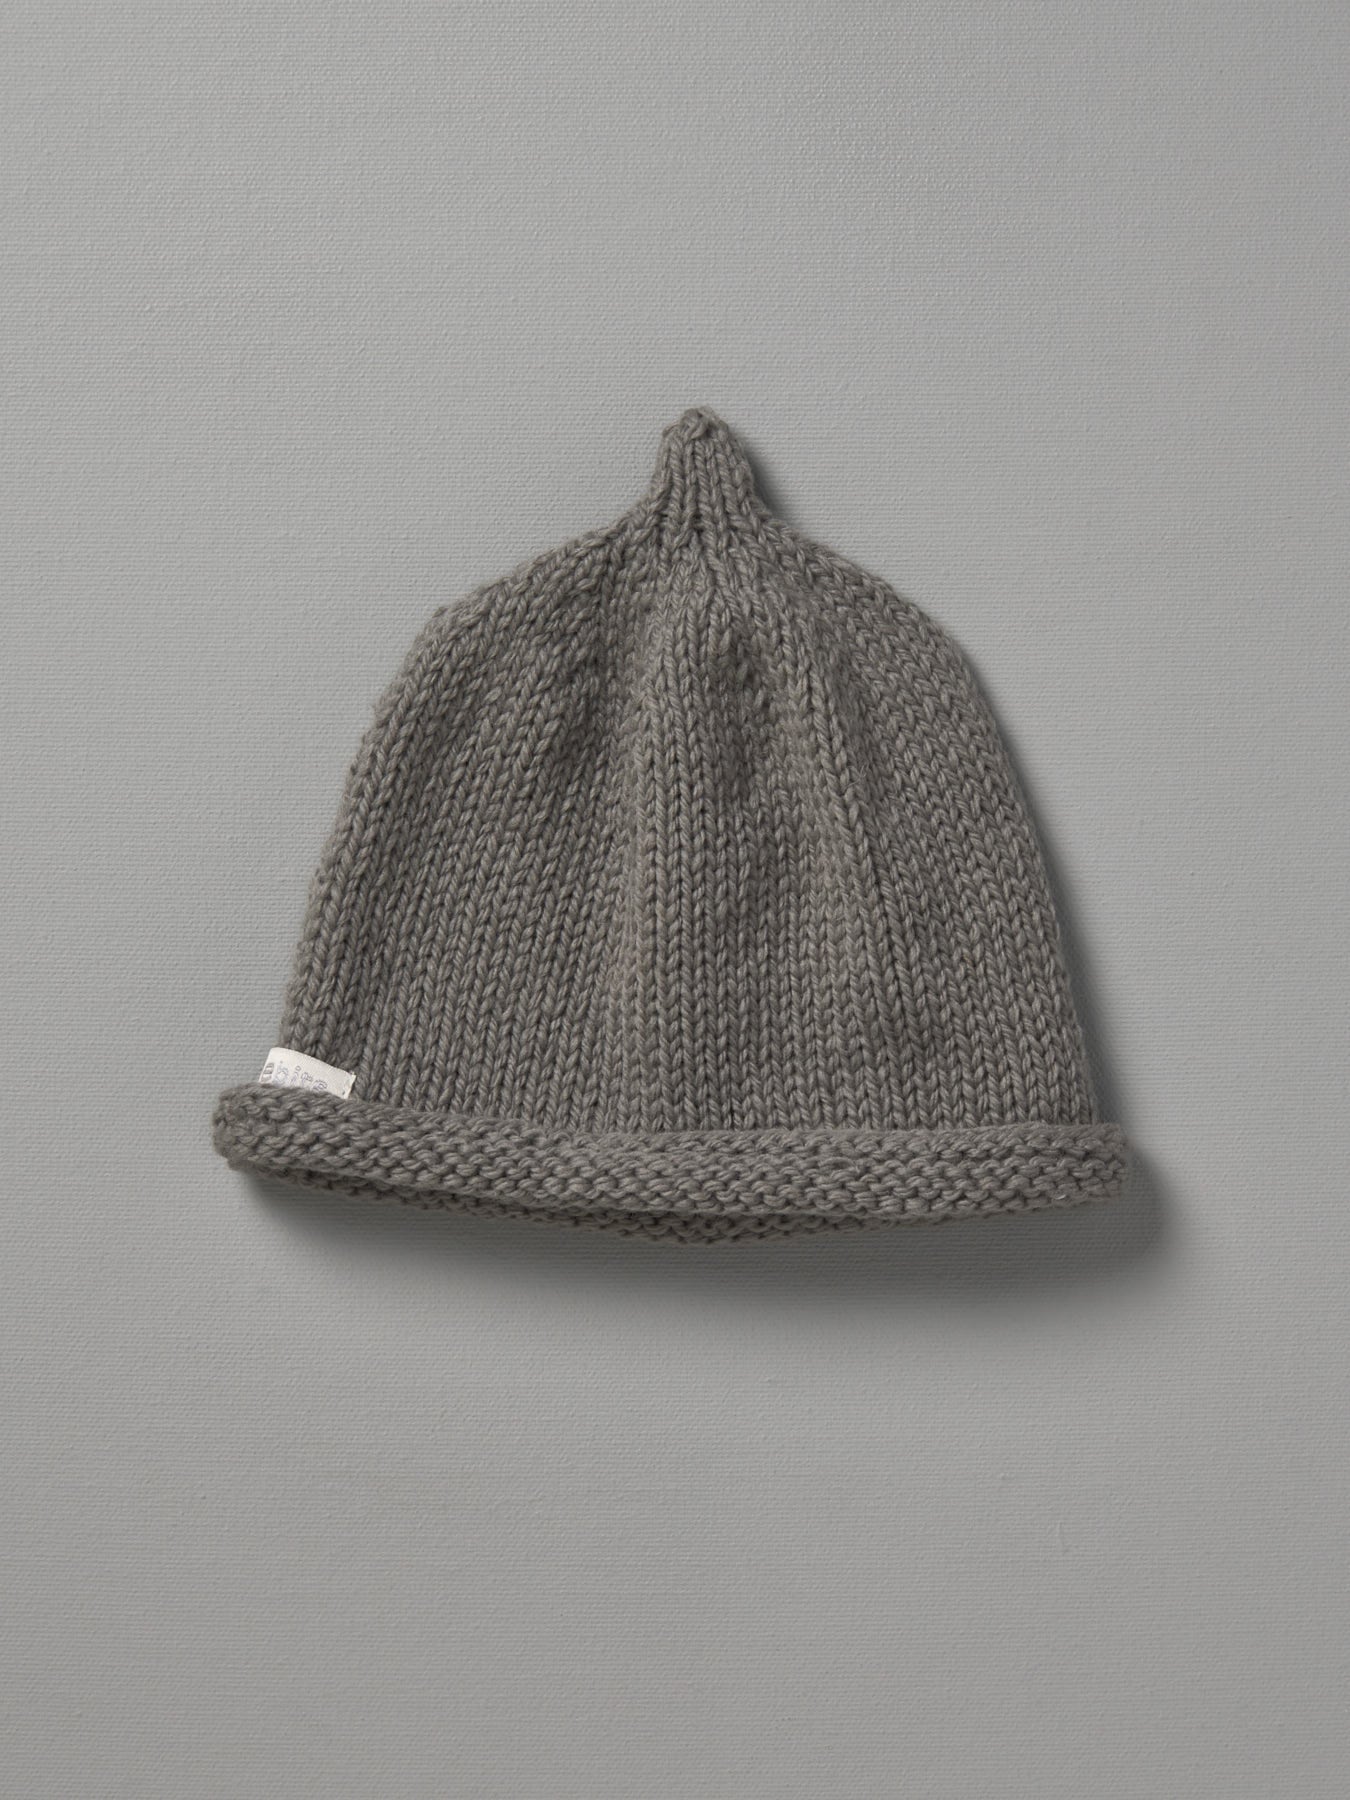 A Hand Knitted Baby Beanie - Mushroom by Weebits on a grey background.